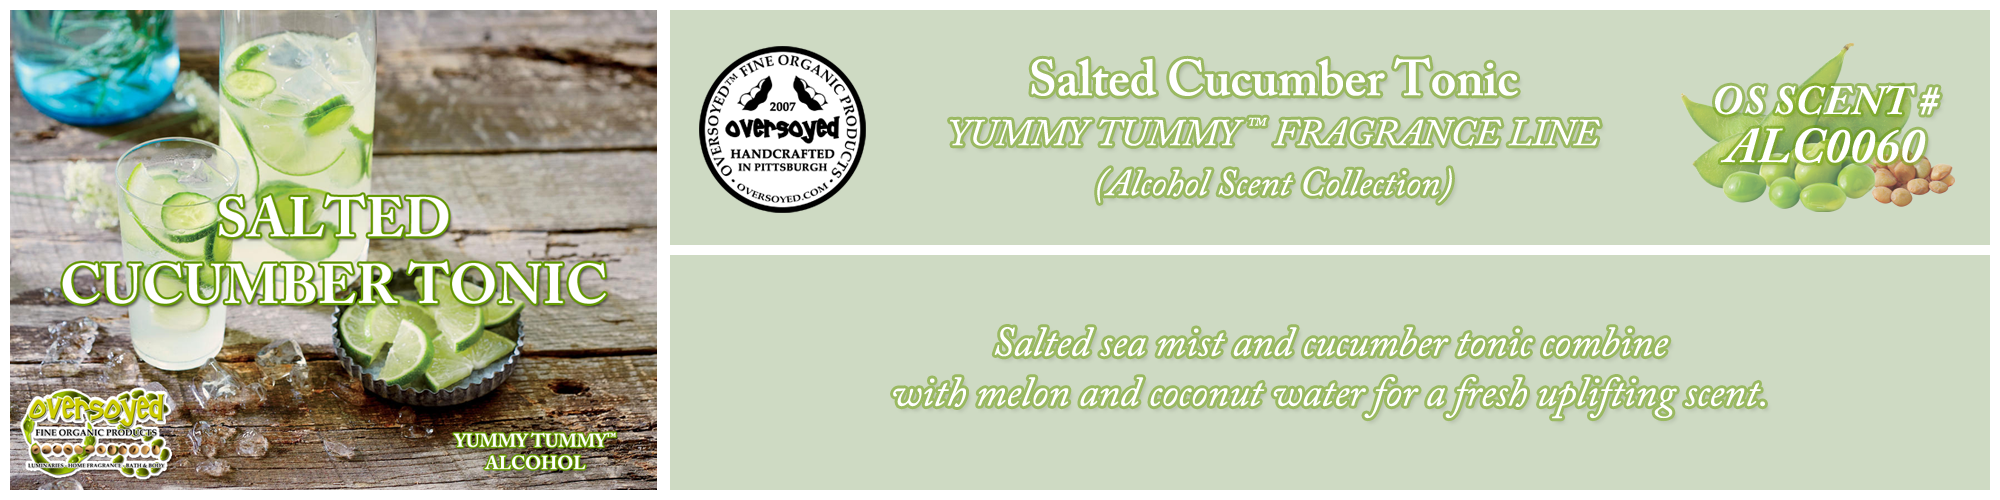 Salted Cucumber Tonic Handcrafted Products Collection